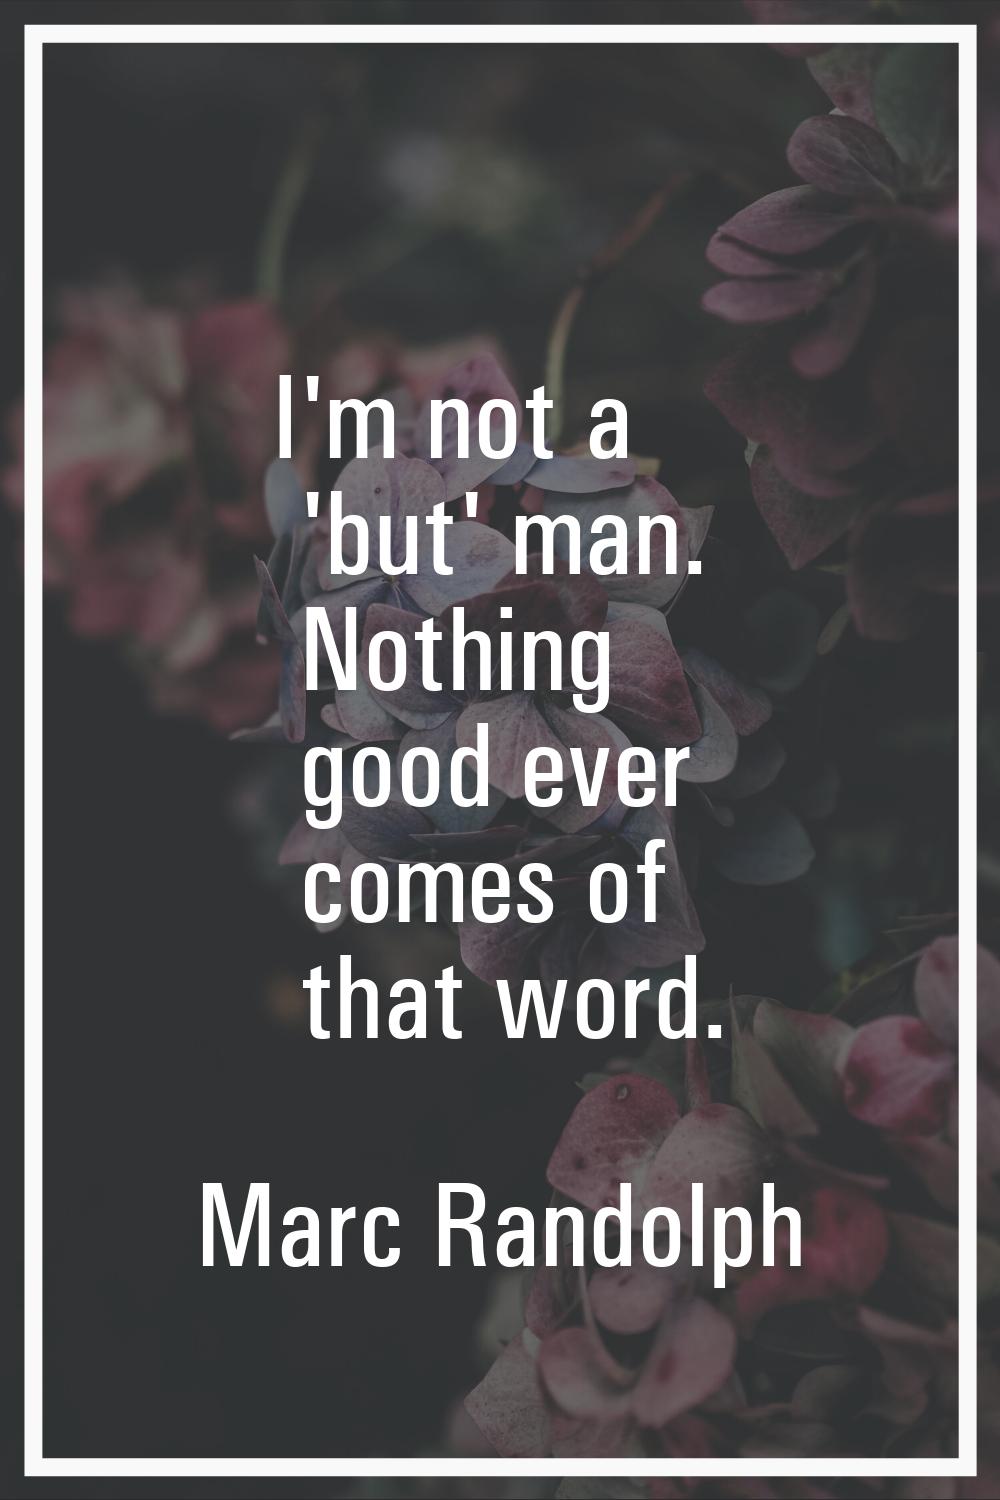 I'm not a 'but' man. Nothing good ever comes of that word.